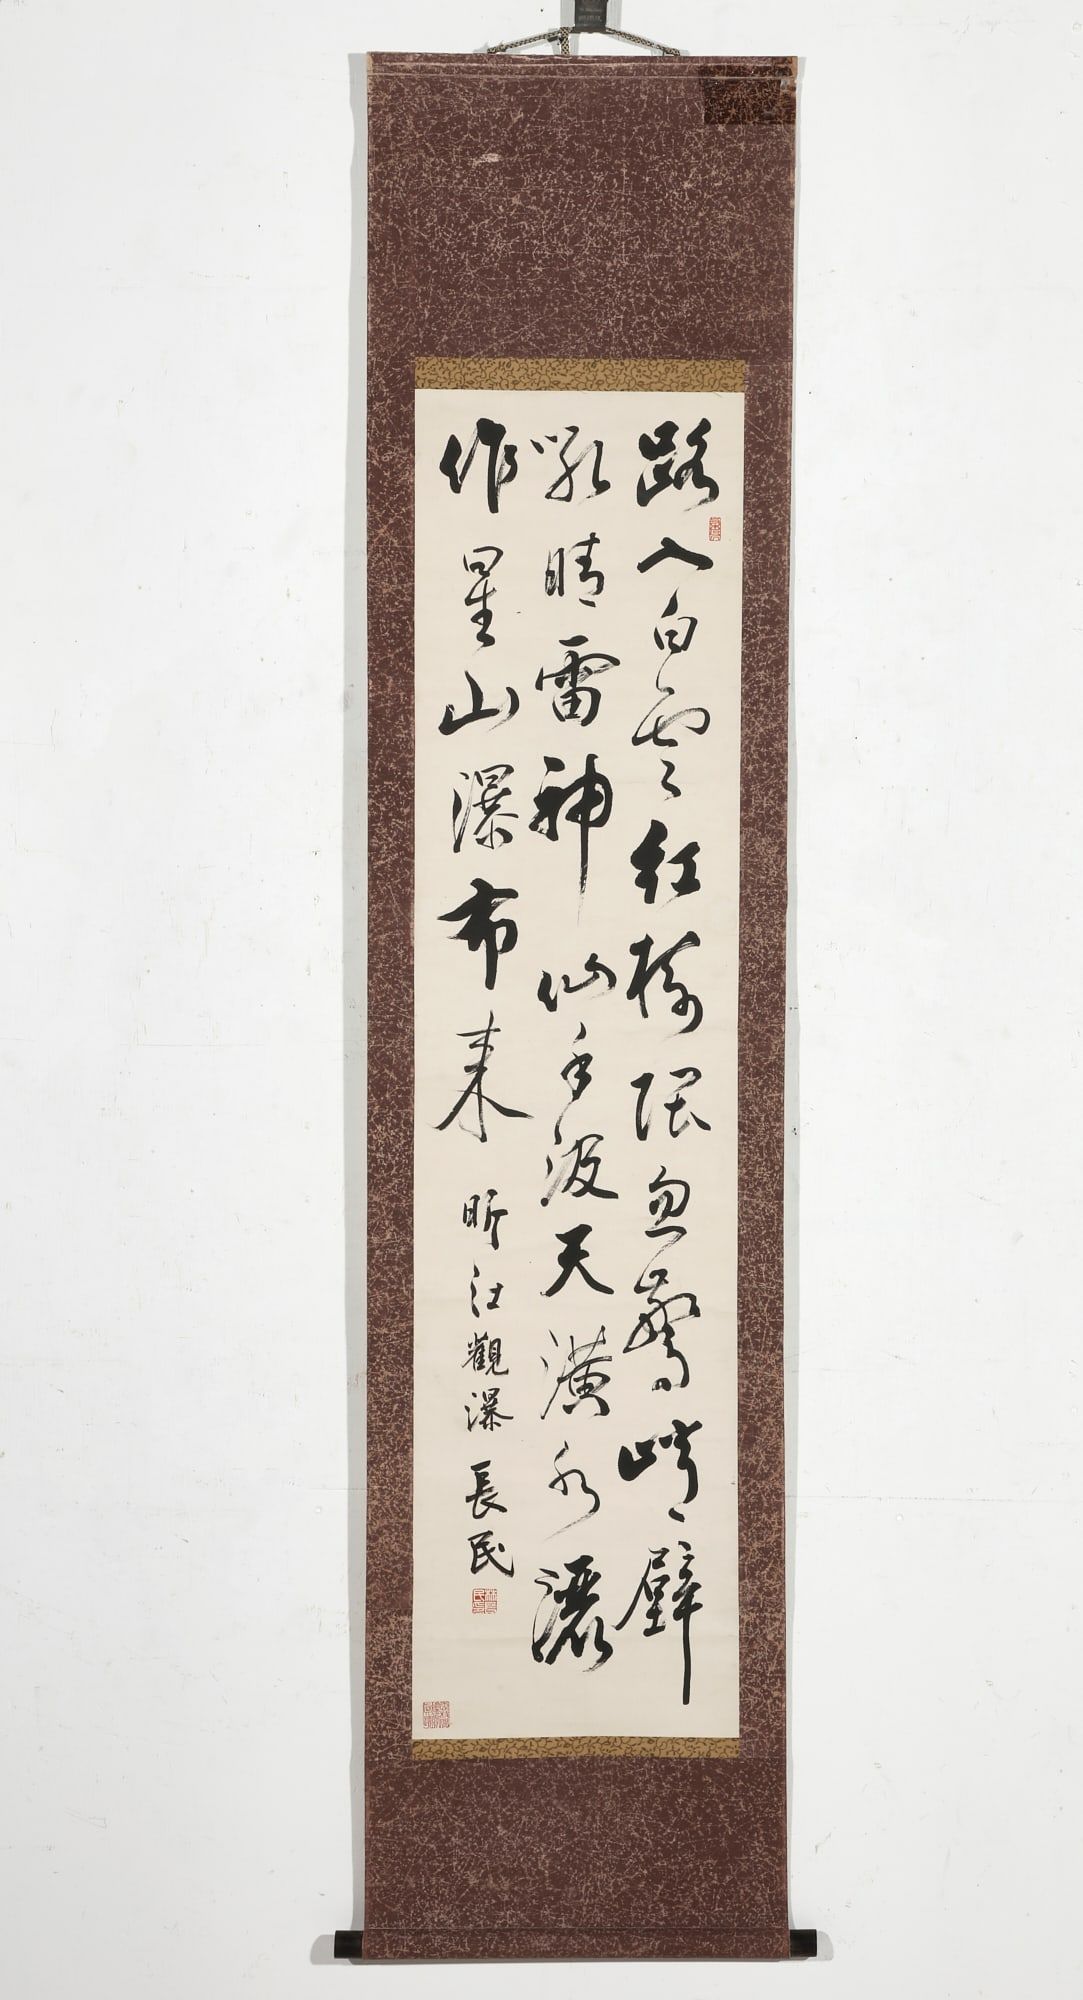 A CHINESE CALLIGRAPHY SCROLL ON 2fb33df